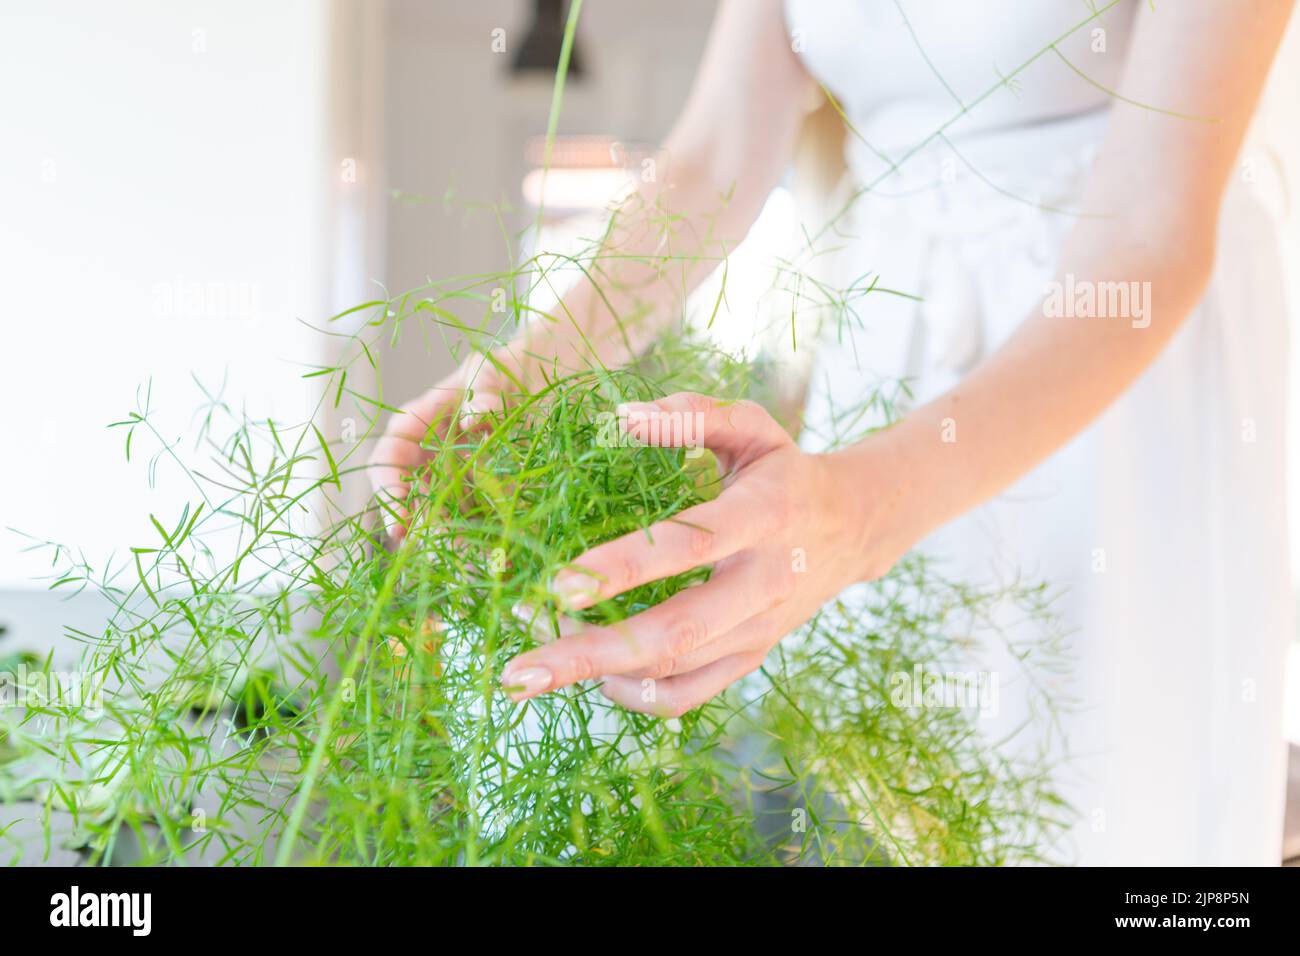 Woman hands touching and caring for the green plant. Stock Photo